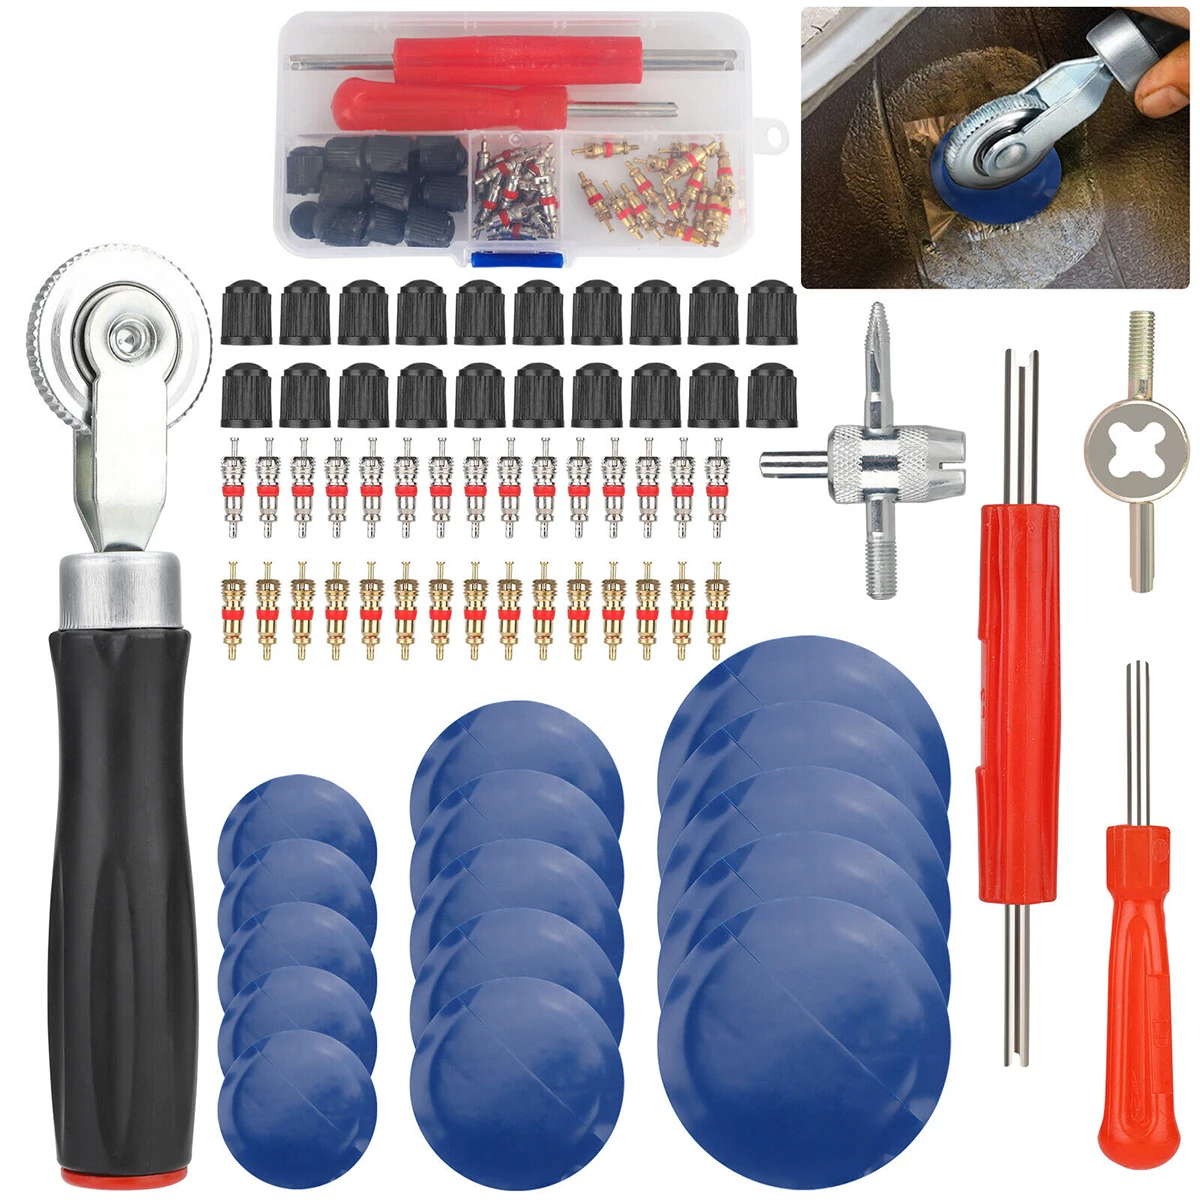 

1.26/1.65/2.28 Inches Tire Repair Tool Other Pneumatic Tires Multifunctional Tyre Repair Kits For Bicycles Cars Awn Mowers ATVs